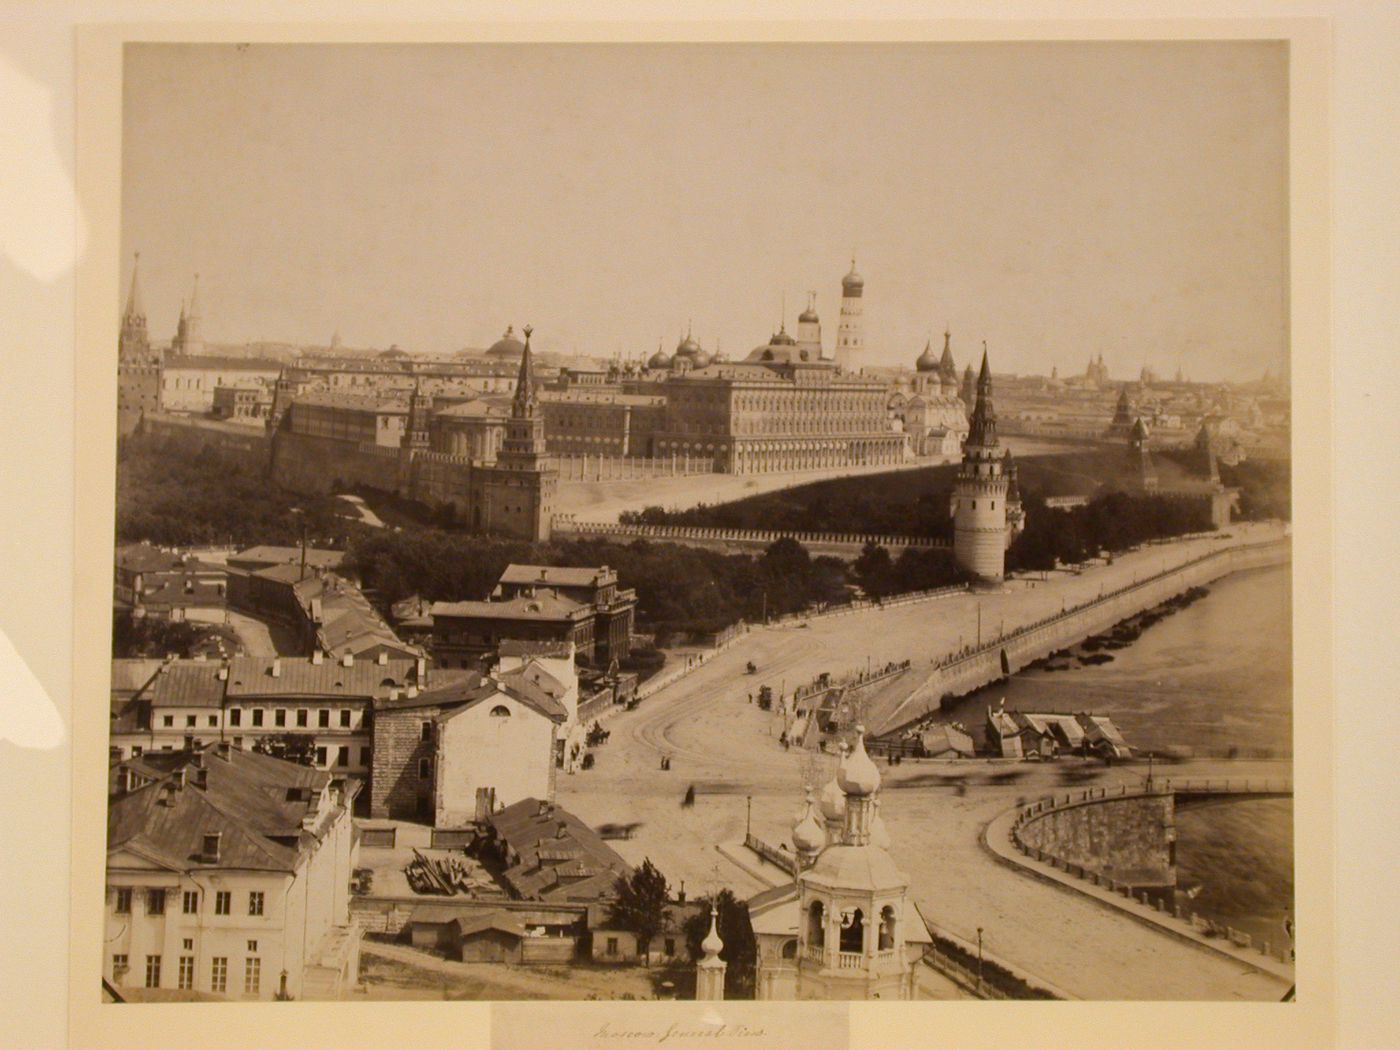 View of the Kremlin showing the Big Kremlin Palace in the center, Moscow